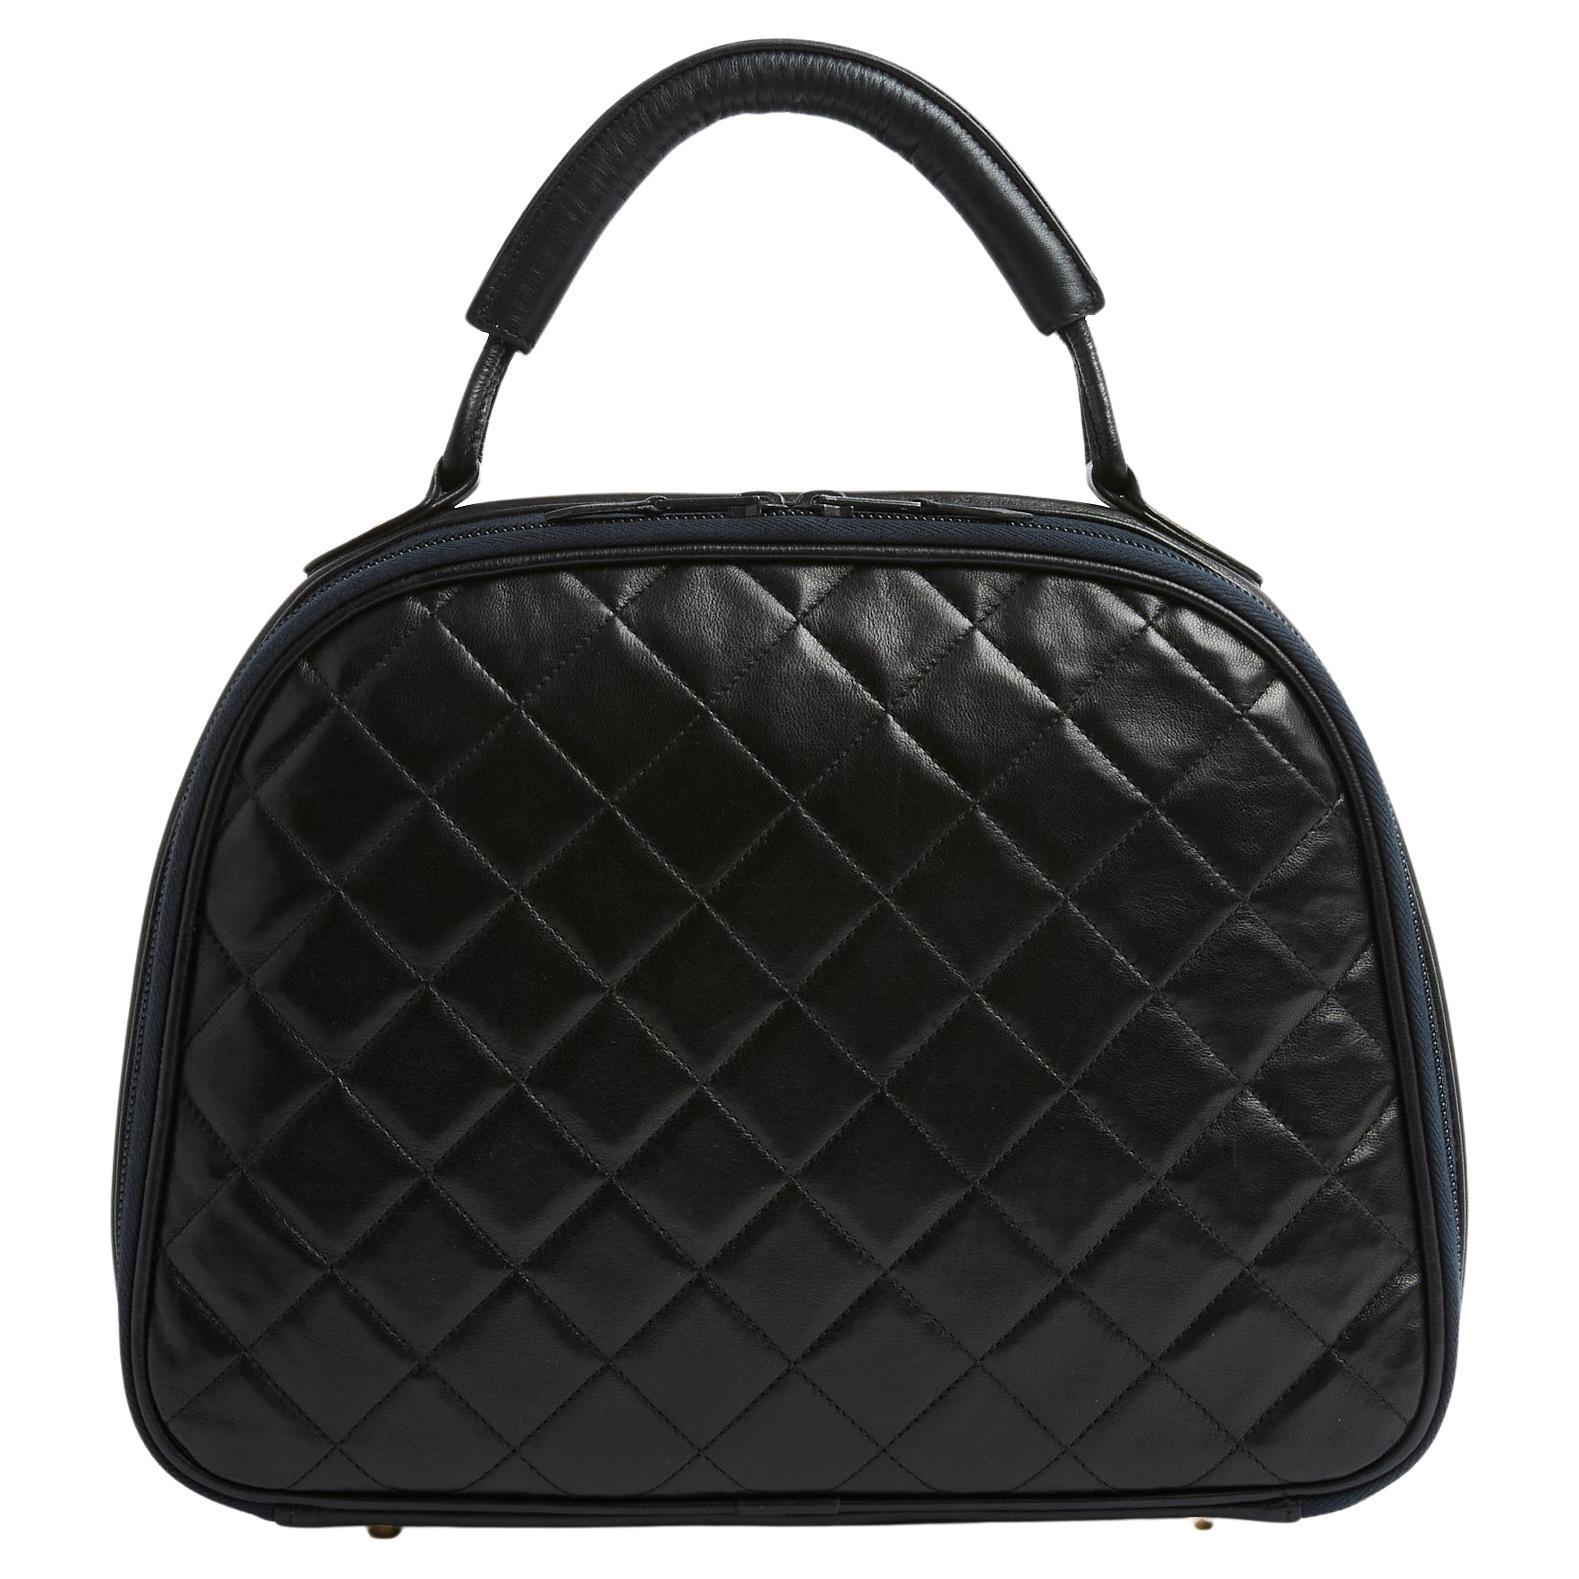 1985 Timeless Classique Black Leather Vanity Hand bag For Sale